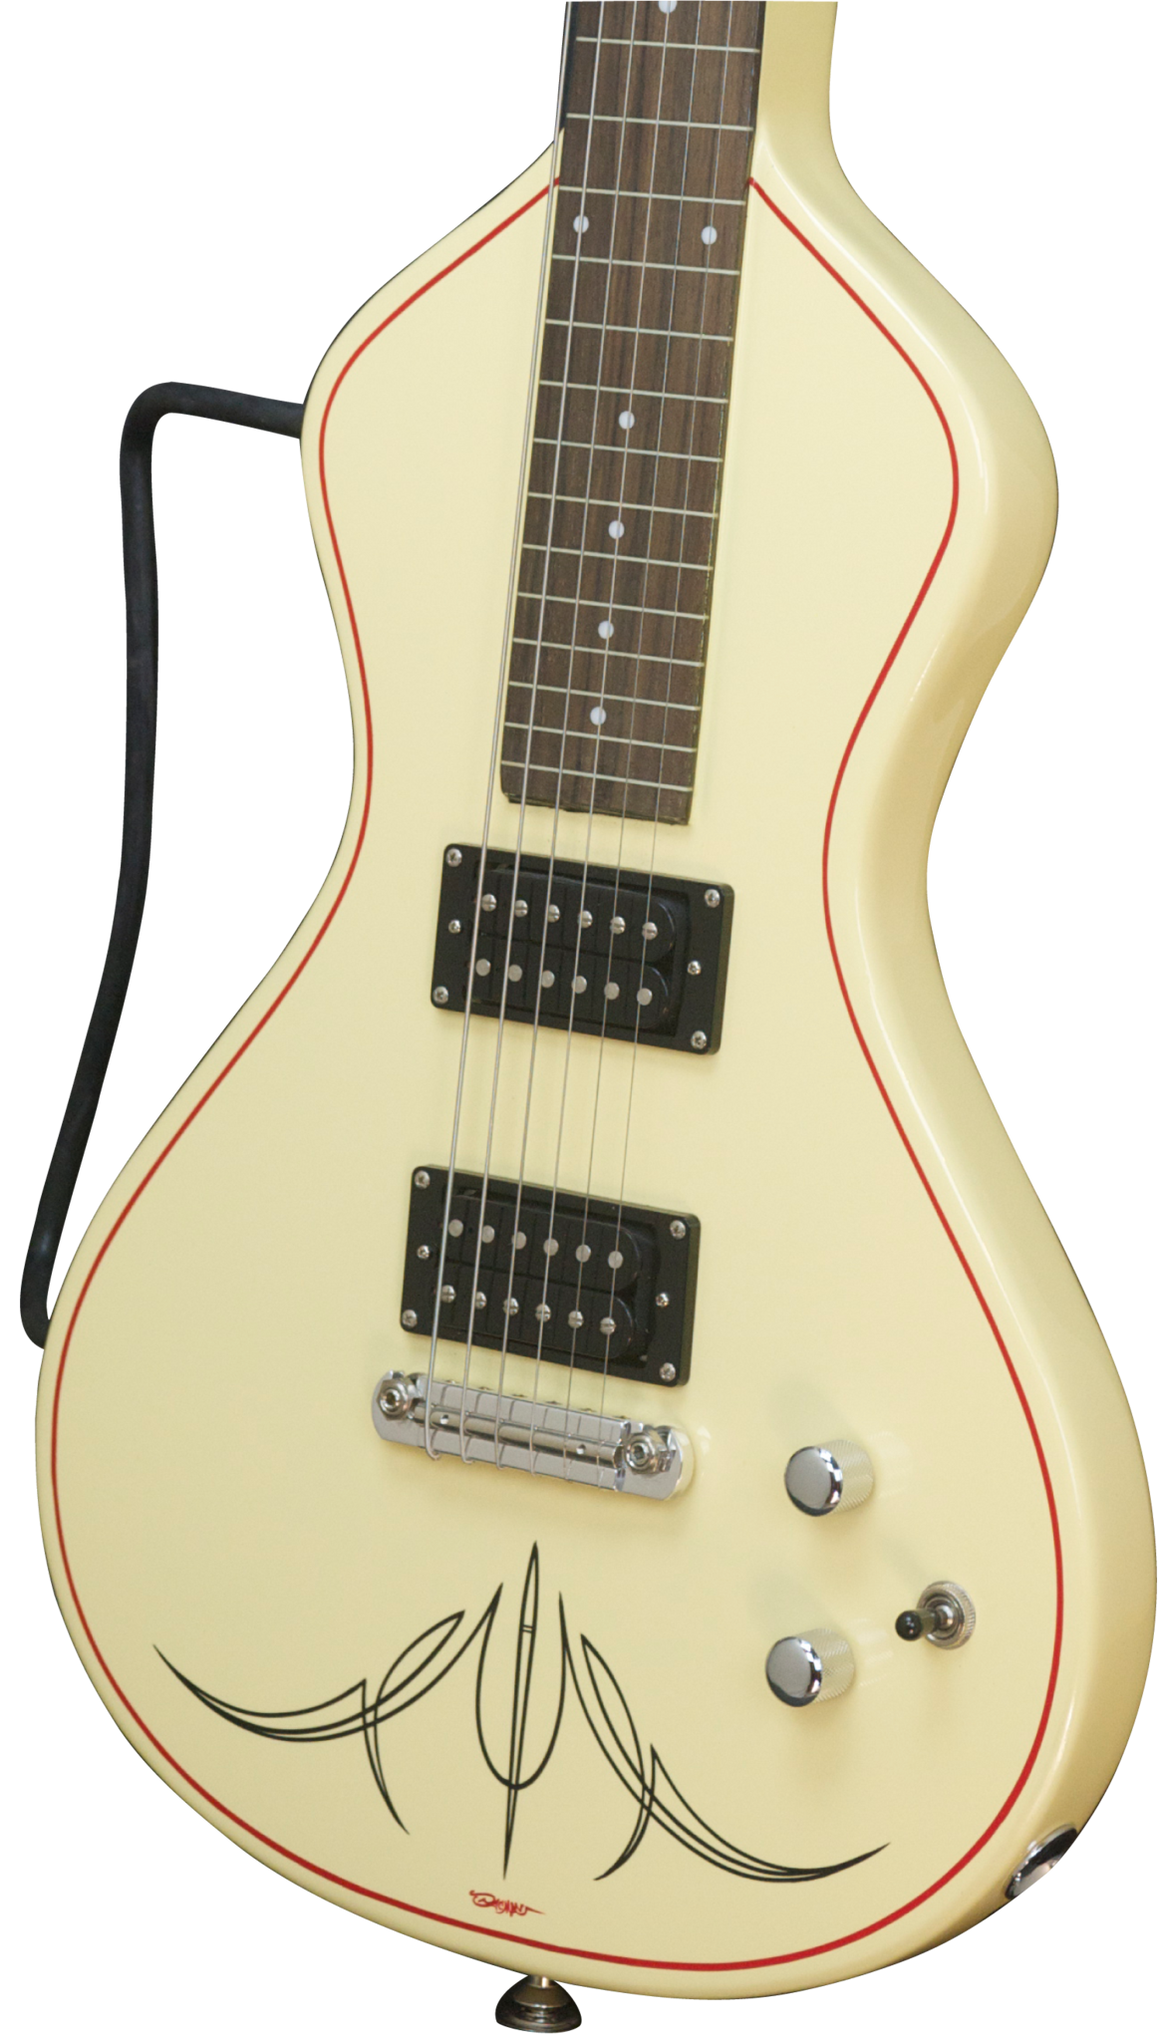 SOLD 2016 Asher Electro Hawaiian Junior with Belly Bar and Pin Striping - Antique White